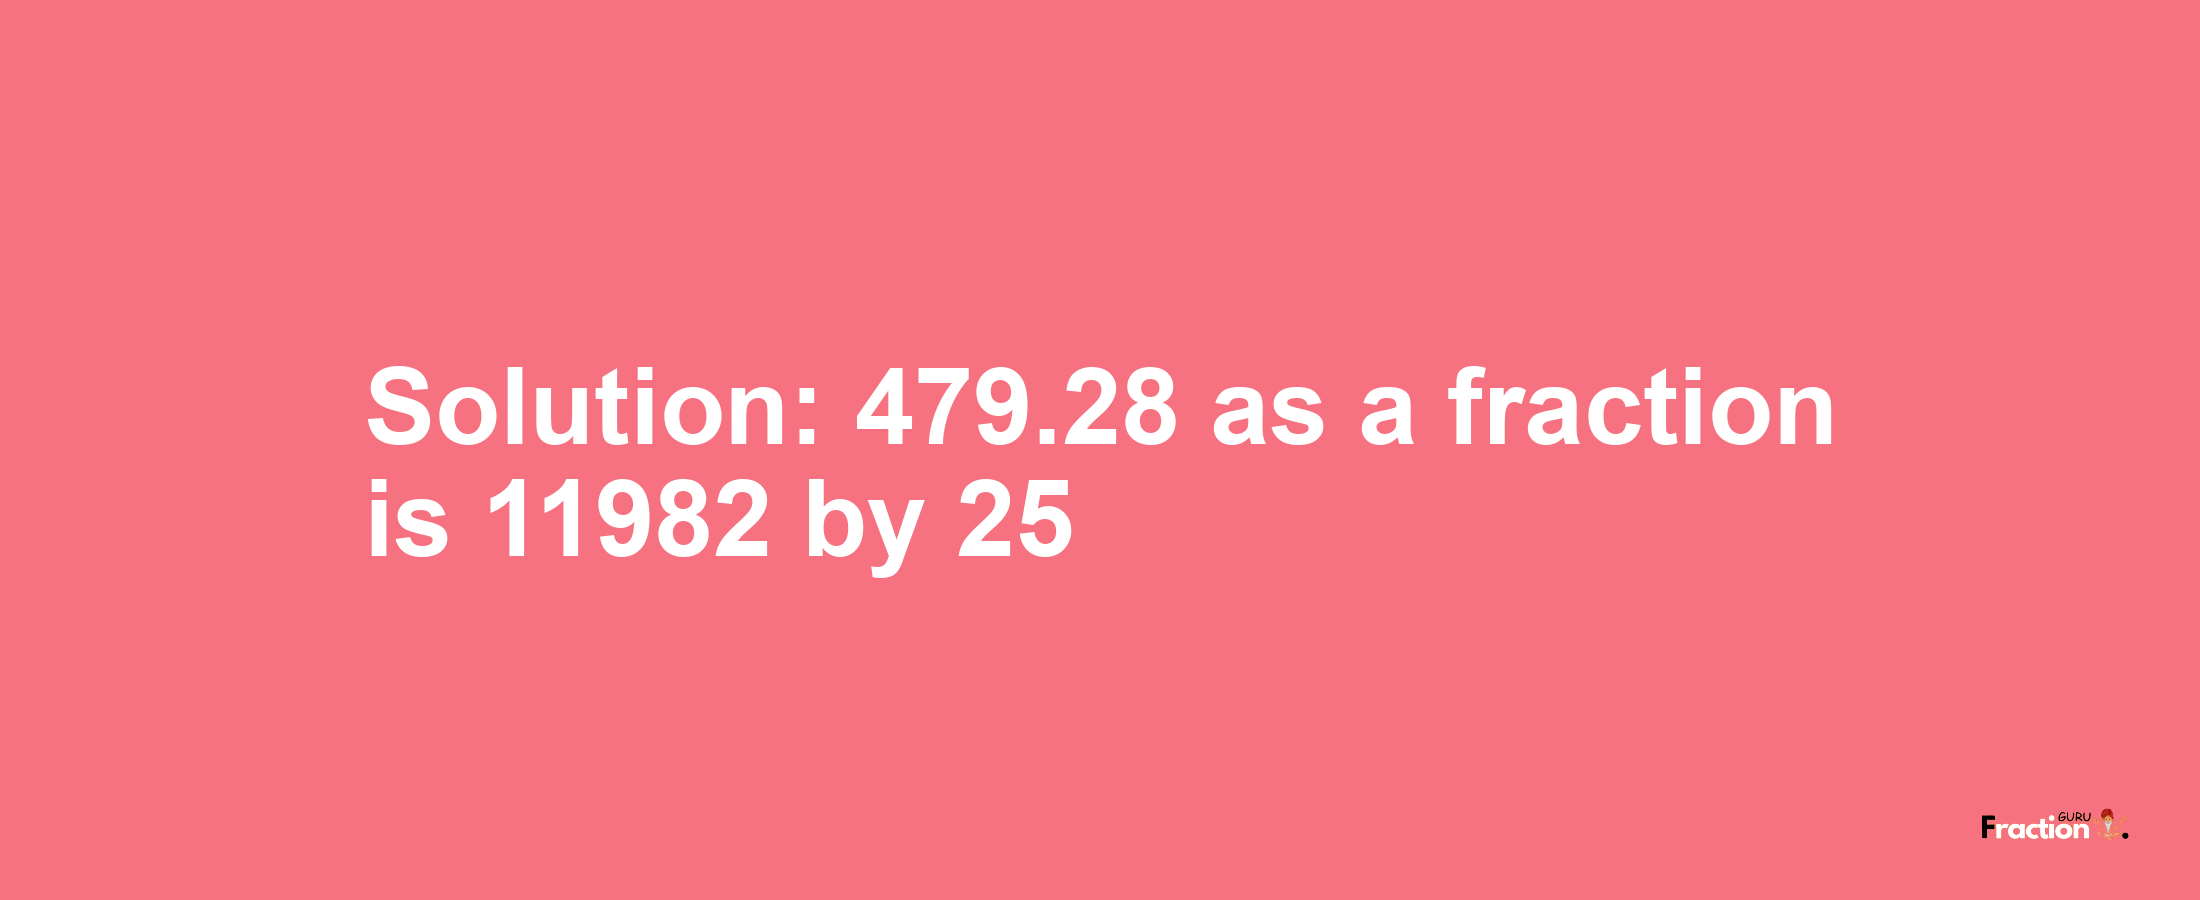 Solution:479.28 as a fraction is 11982/25